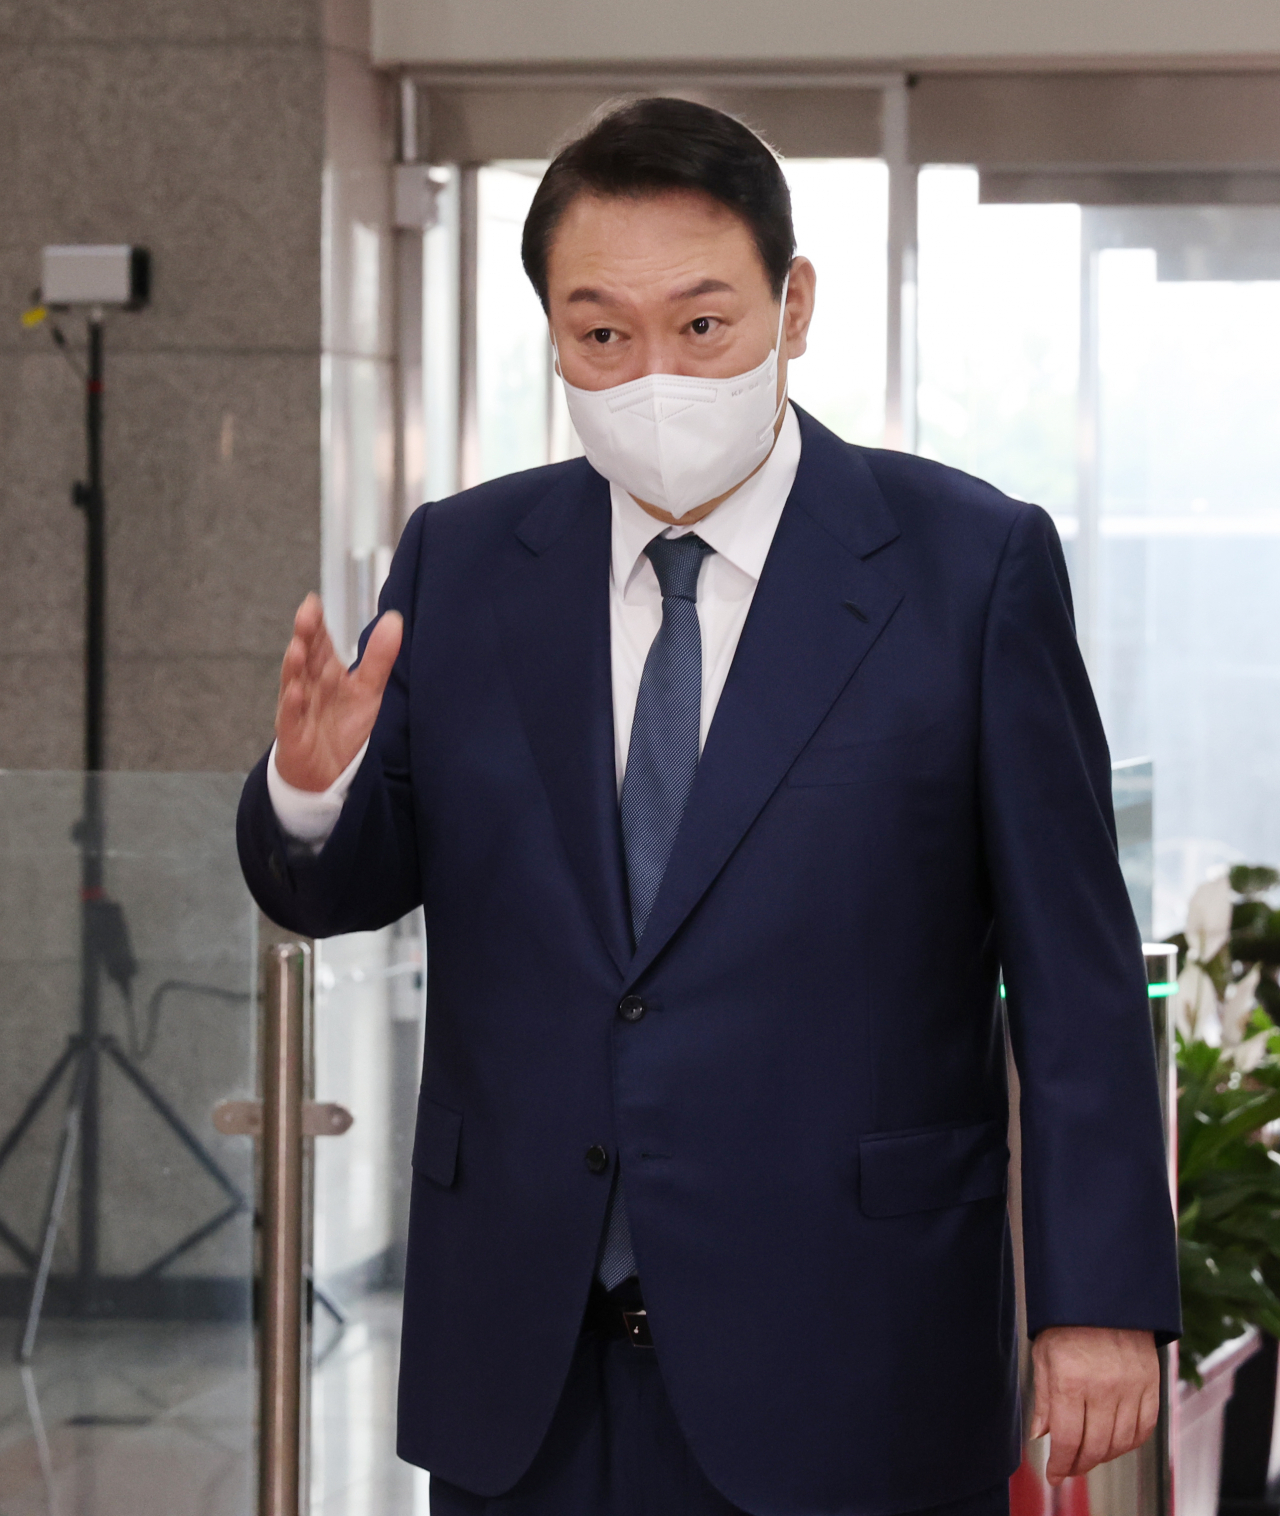 President Yoon Suk-yeol speaks to reporters as he arrives for work at the presidential office in Seoul on Monday. (Yonhap)